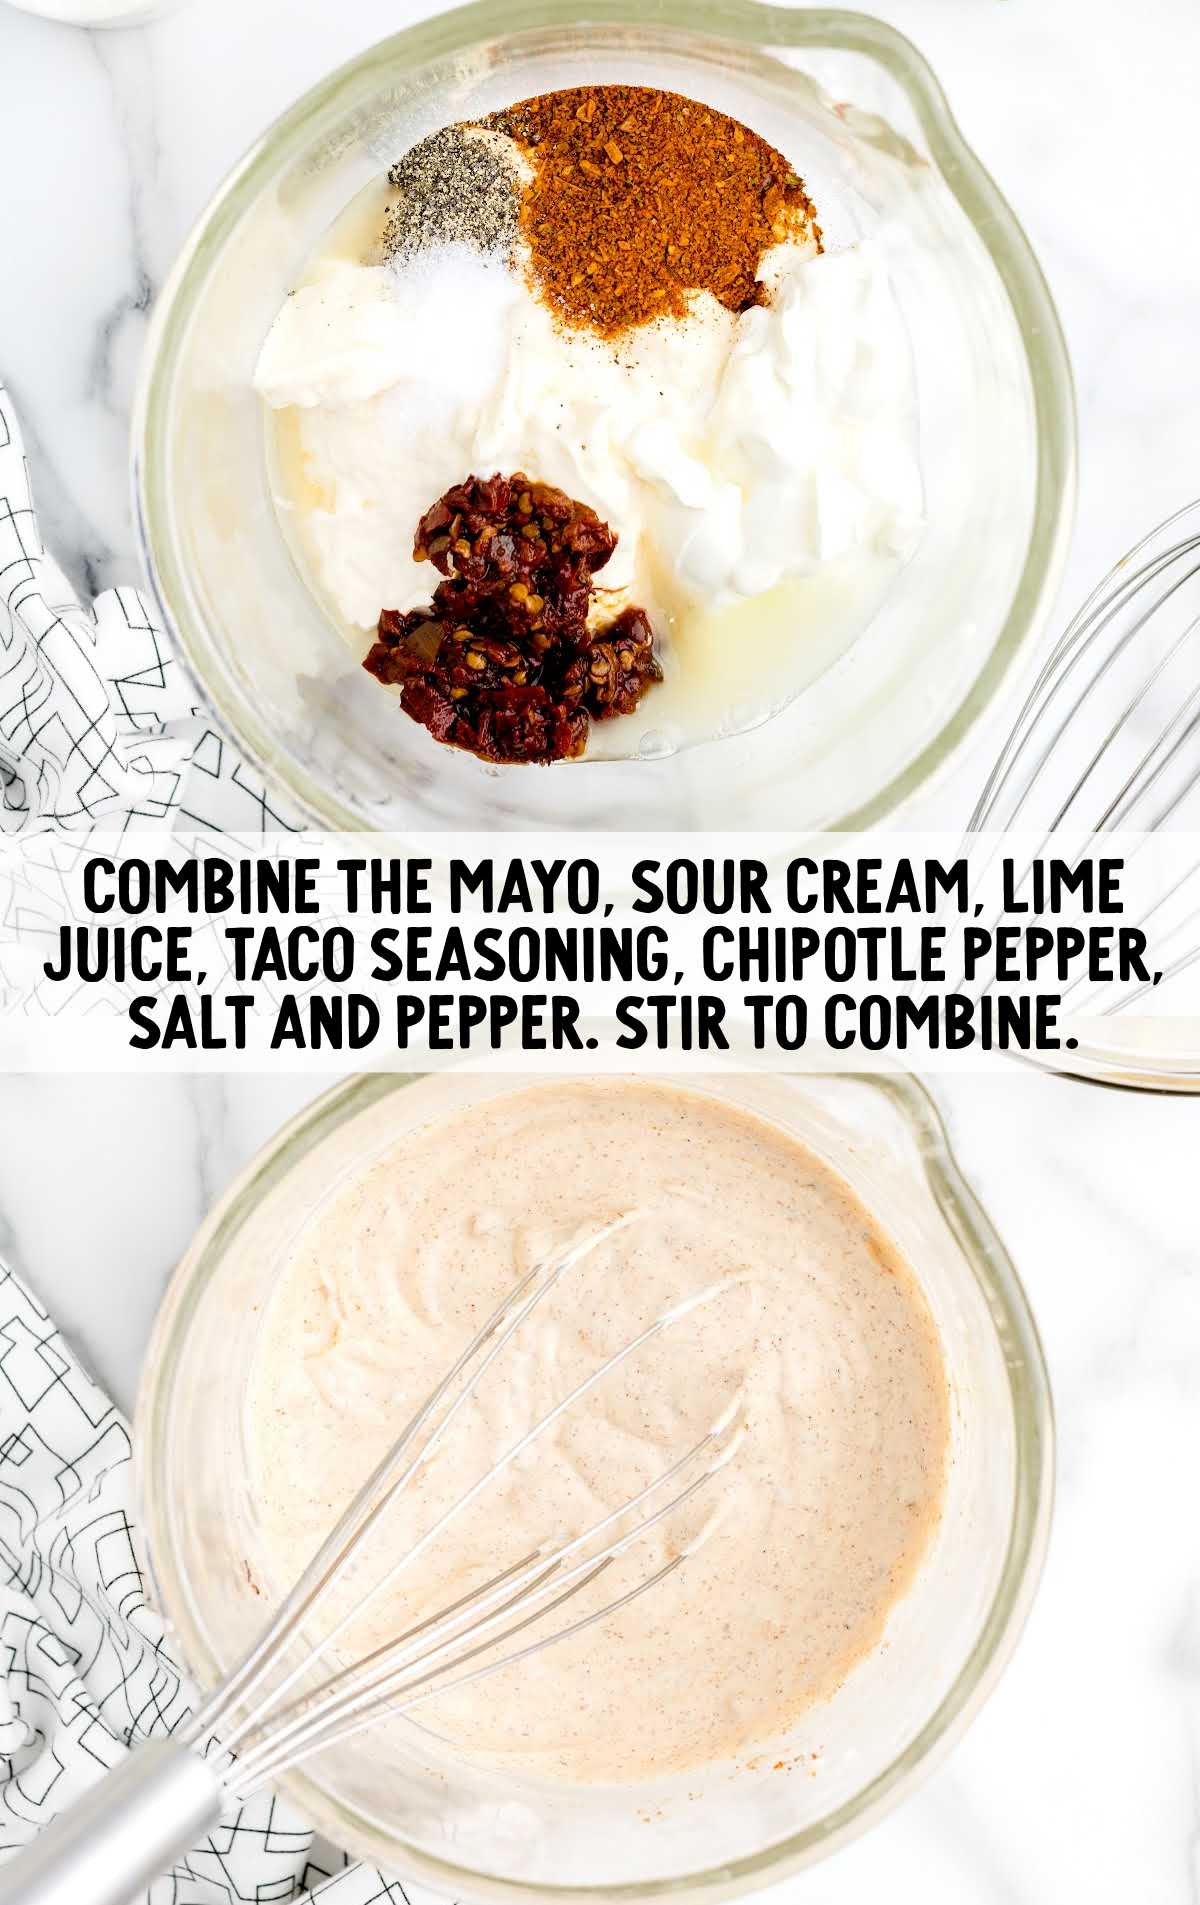 mayo, sour cream, lime juice, taco seasoning, chopped pepper, salt and pepper whisked in a bowl